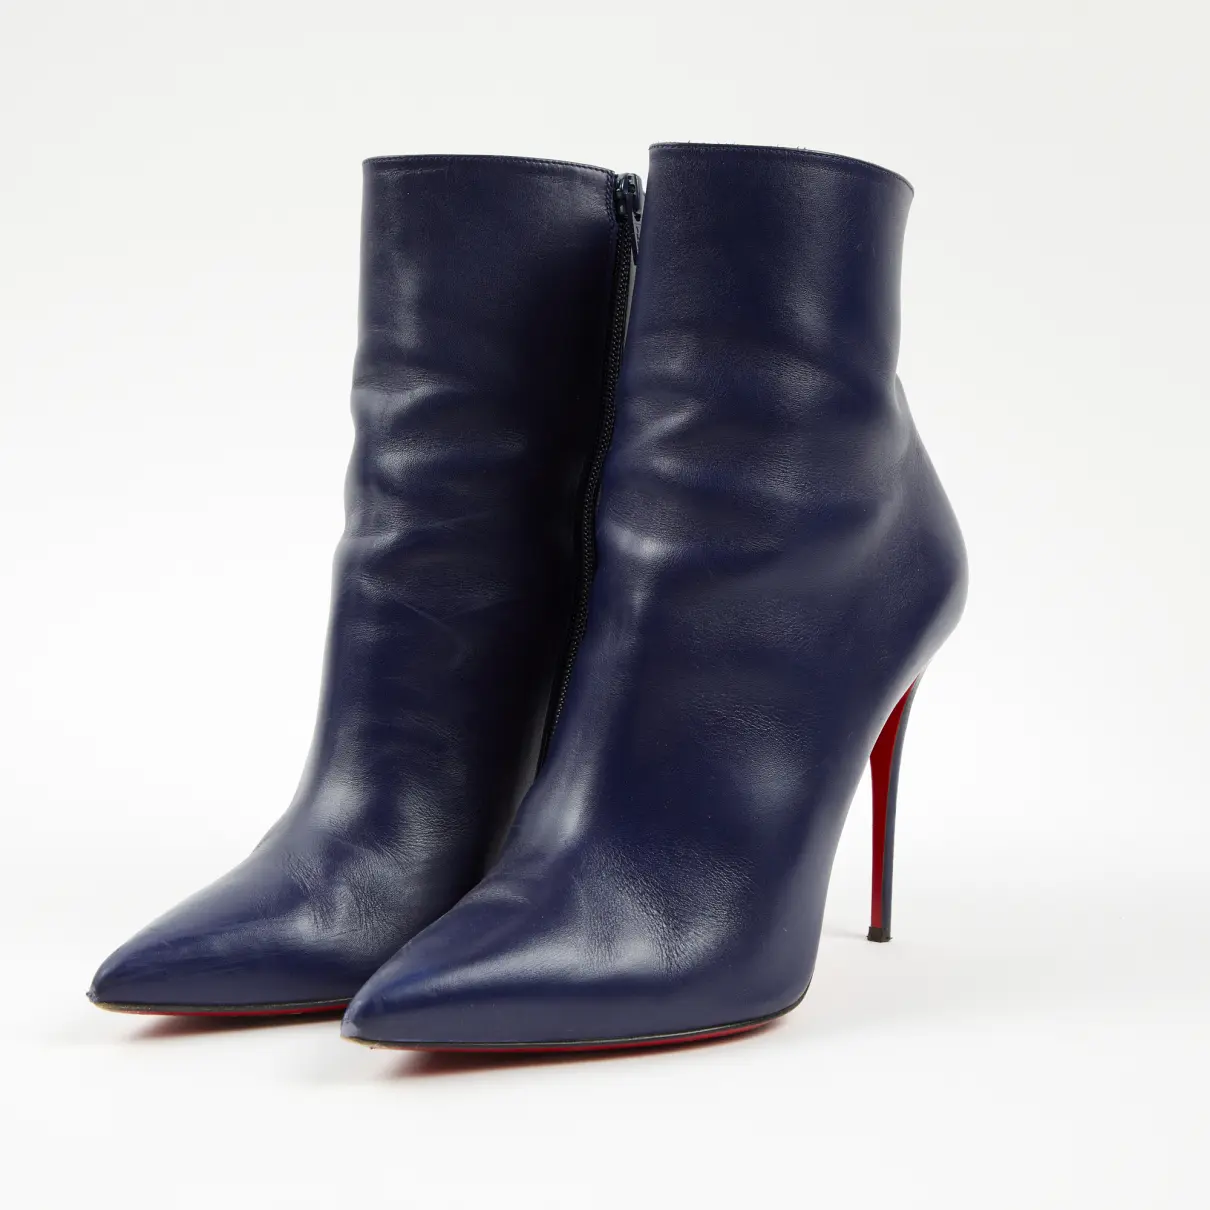 Buy Christian Louboutin So Kate Booty leather ankle boots online